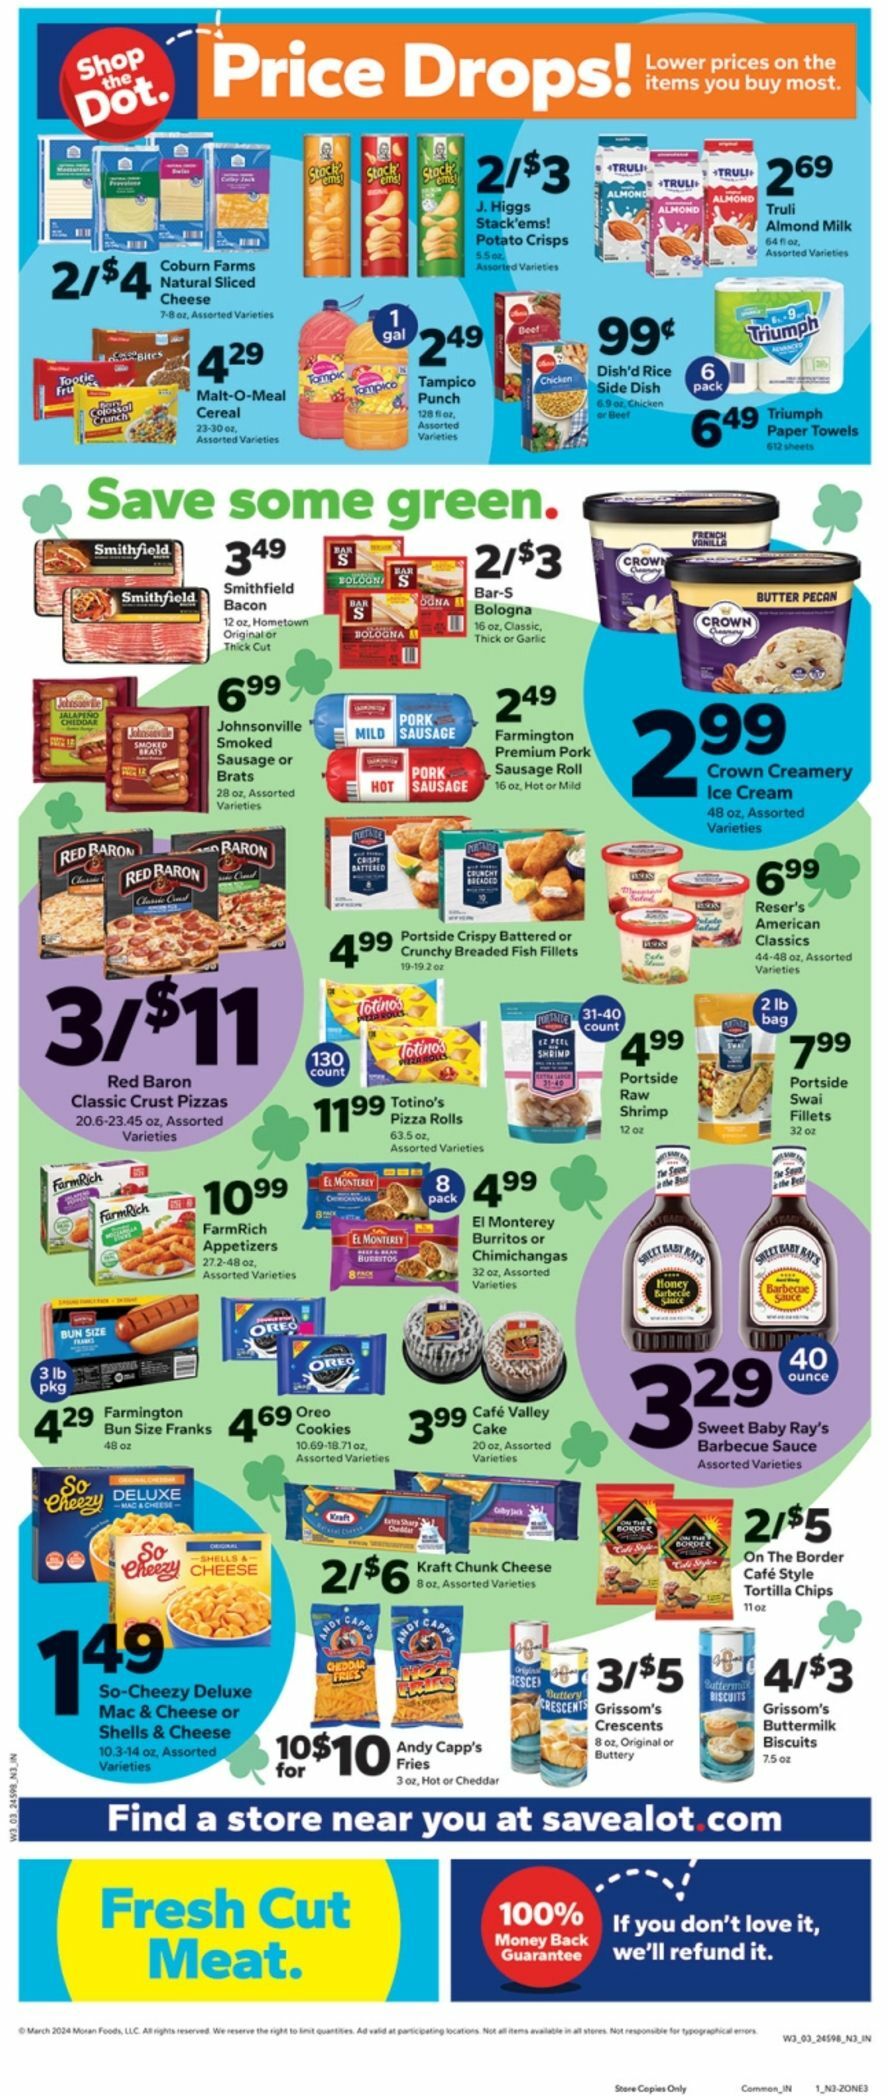 Save A Lot Weekly Ad from March 13